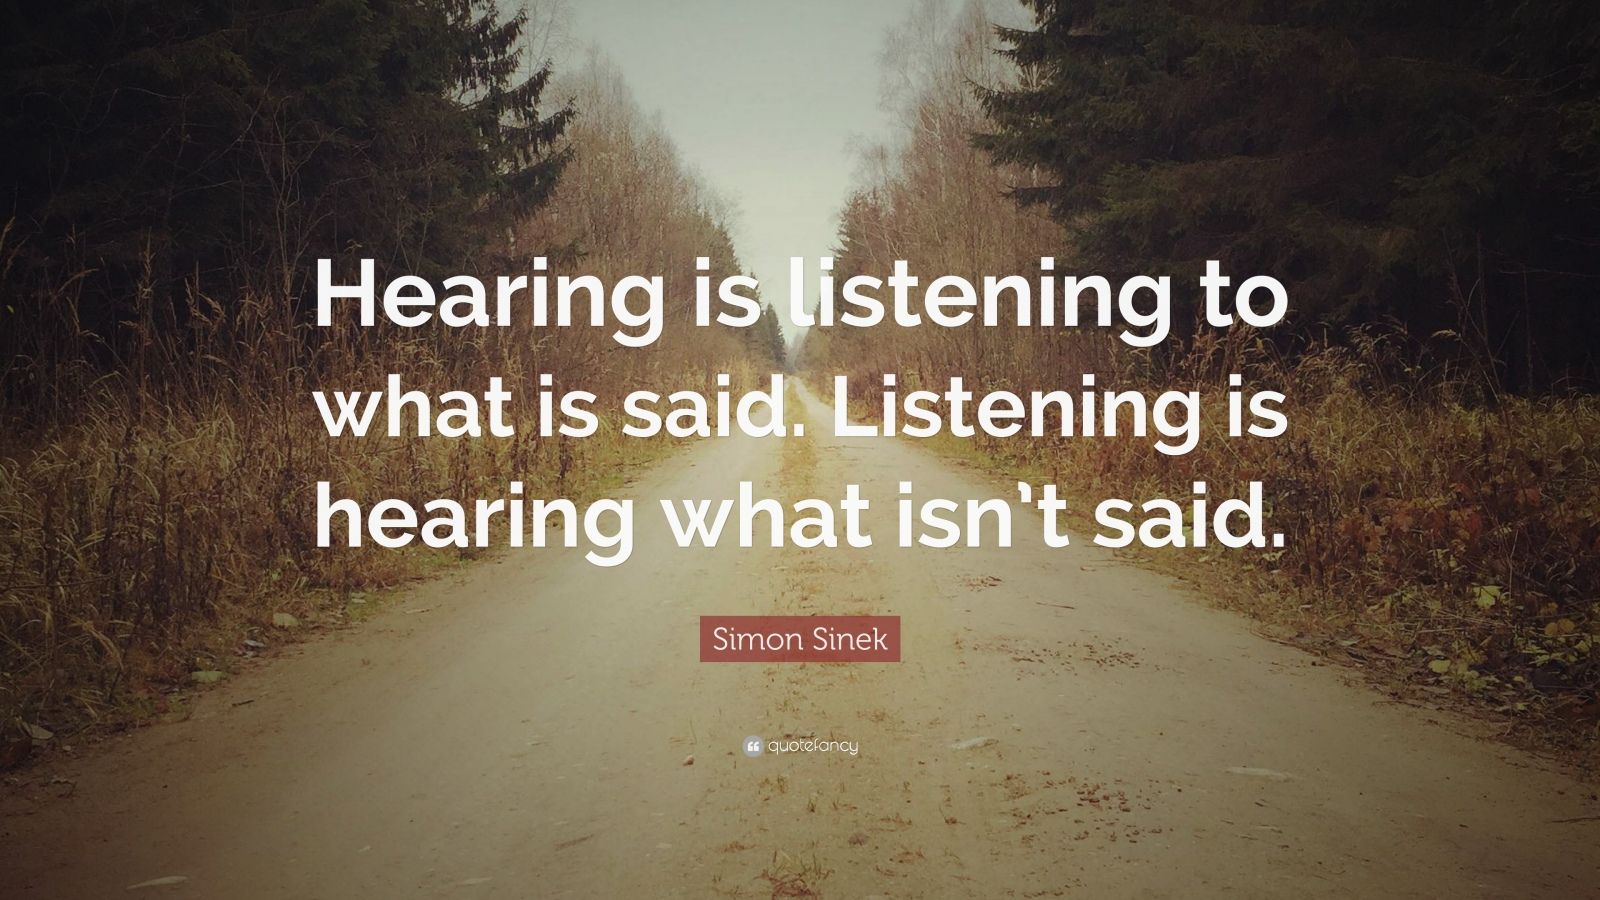 Simon Sinek Quote: “Hearing is listening to what is said. Listening is